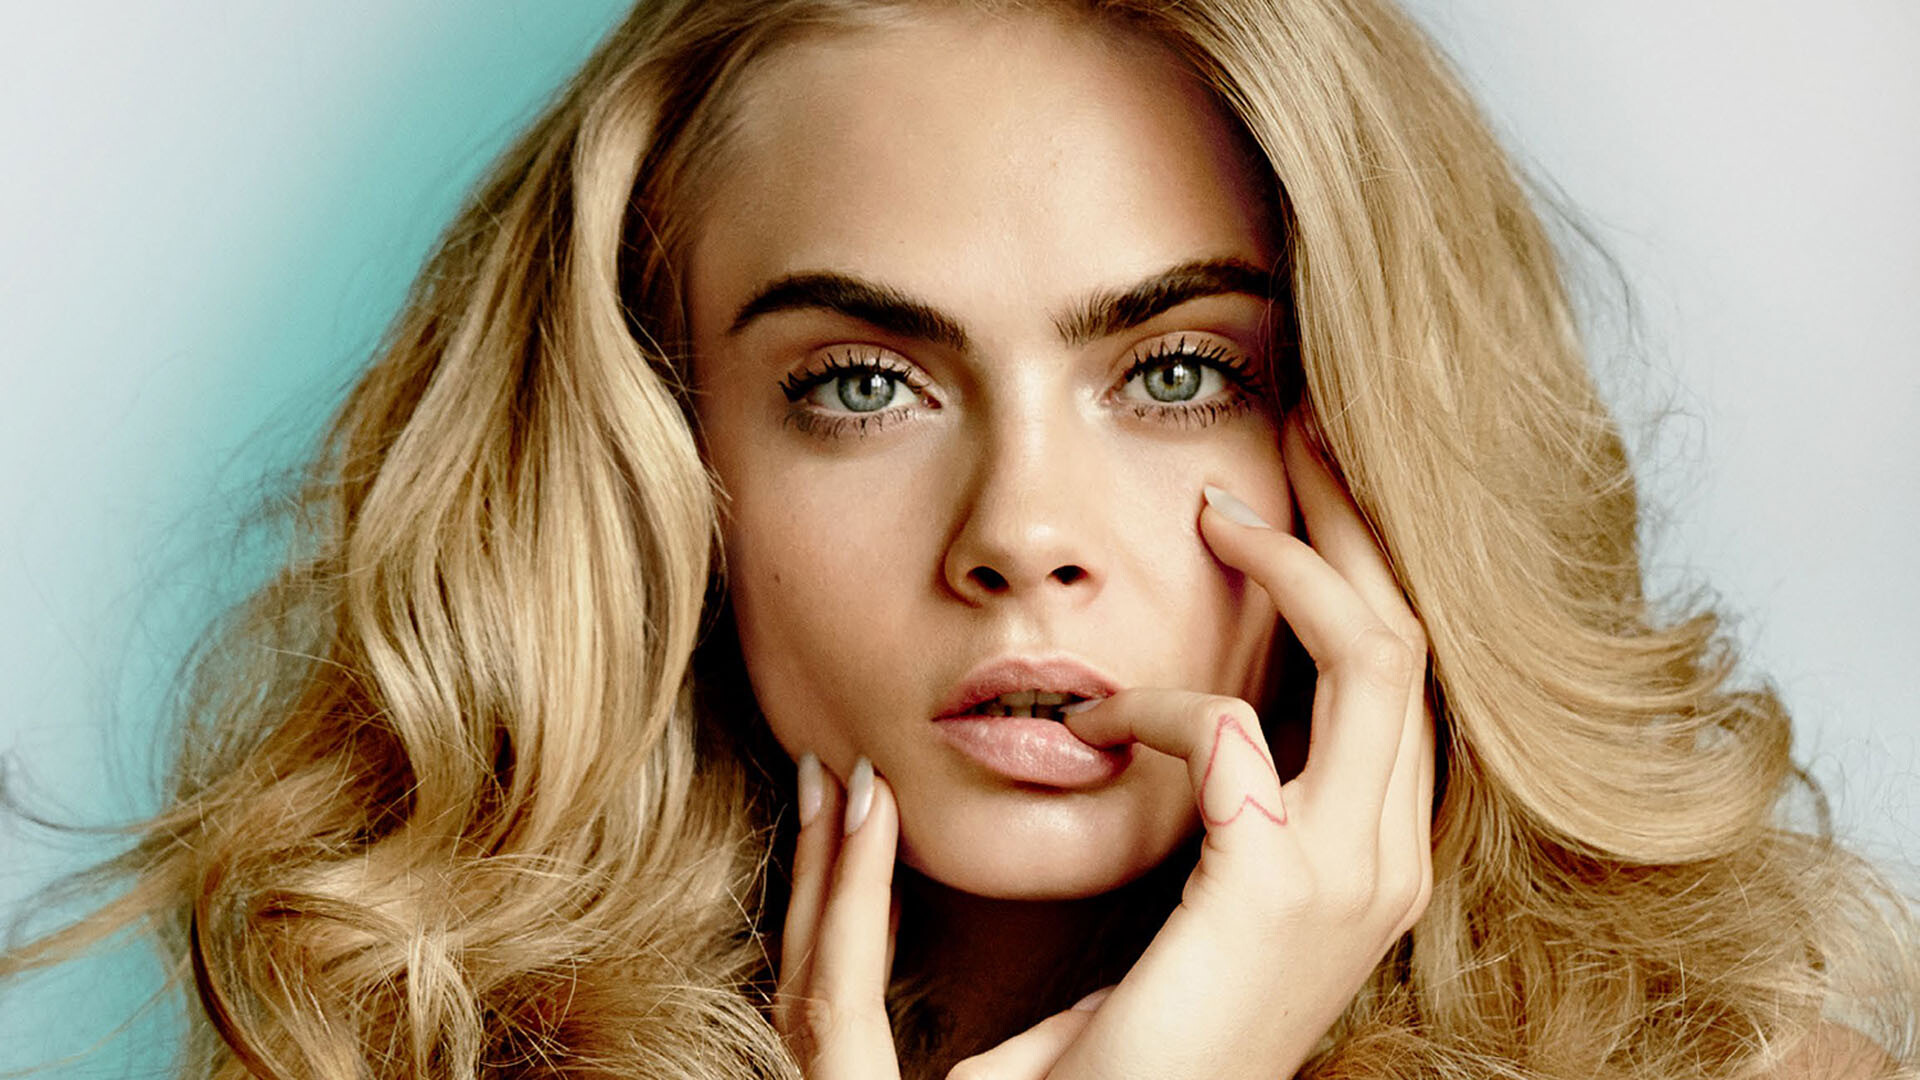 Cara Delevingne: Model, One of the most recognizable faces in the world. 1920x1080 Full HD Wallpaper.